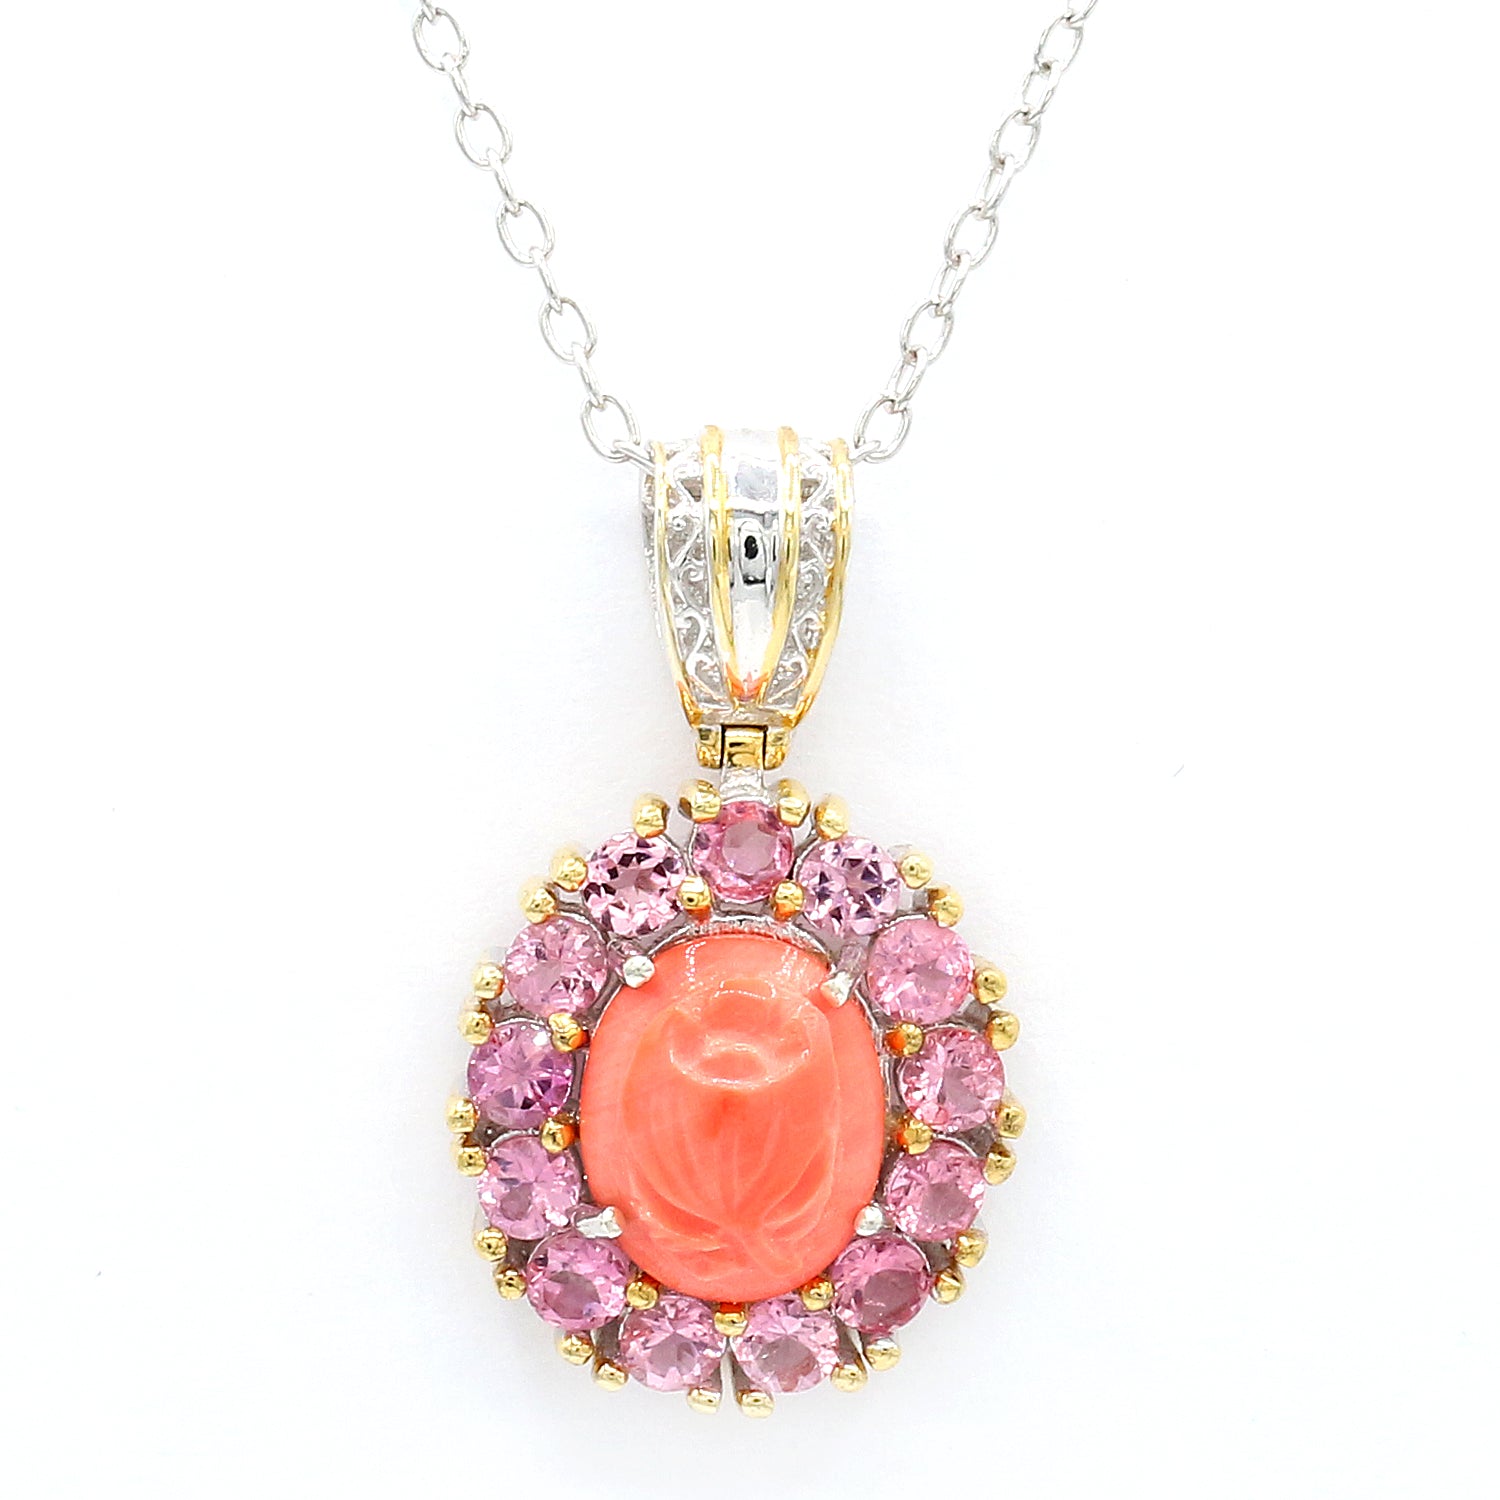 Gems en Vogue One-of-a-Kind Carved Salmon Coral Cameo & Pink Tourmaline Flower Pendant